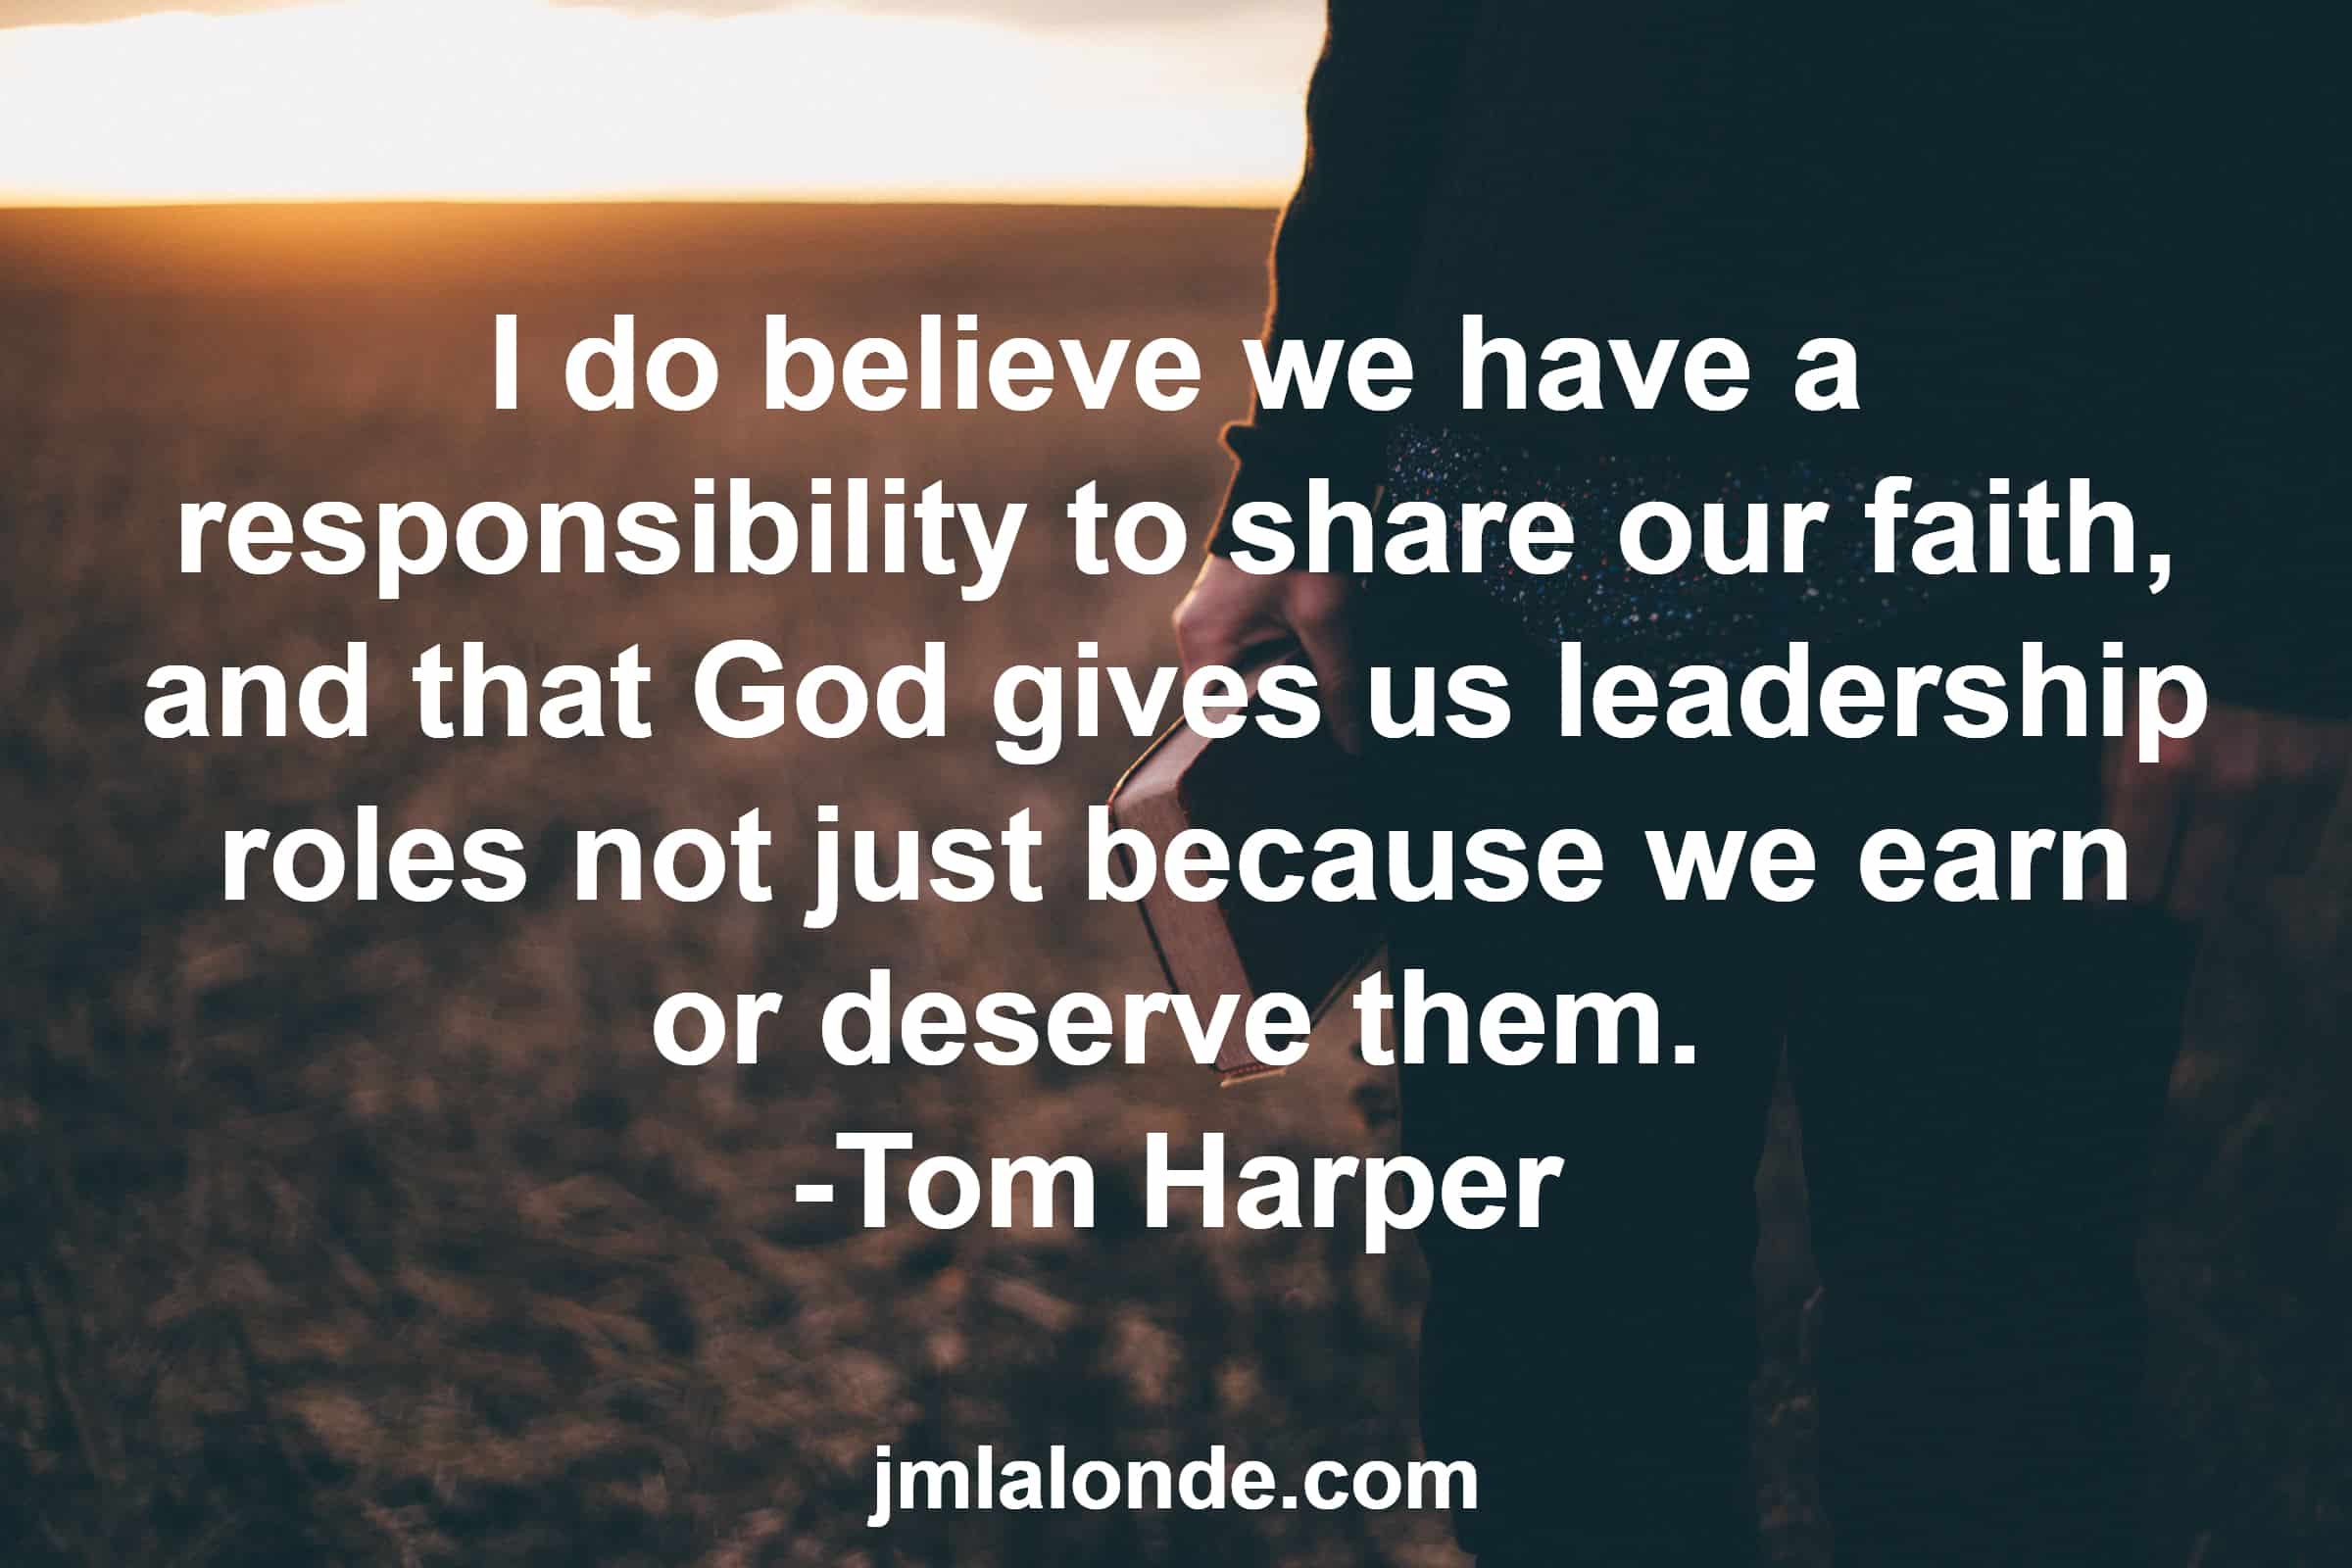 Learn how to share your faith in the workplace with Tom Harper